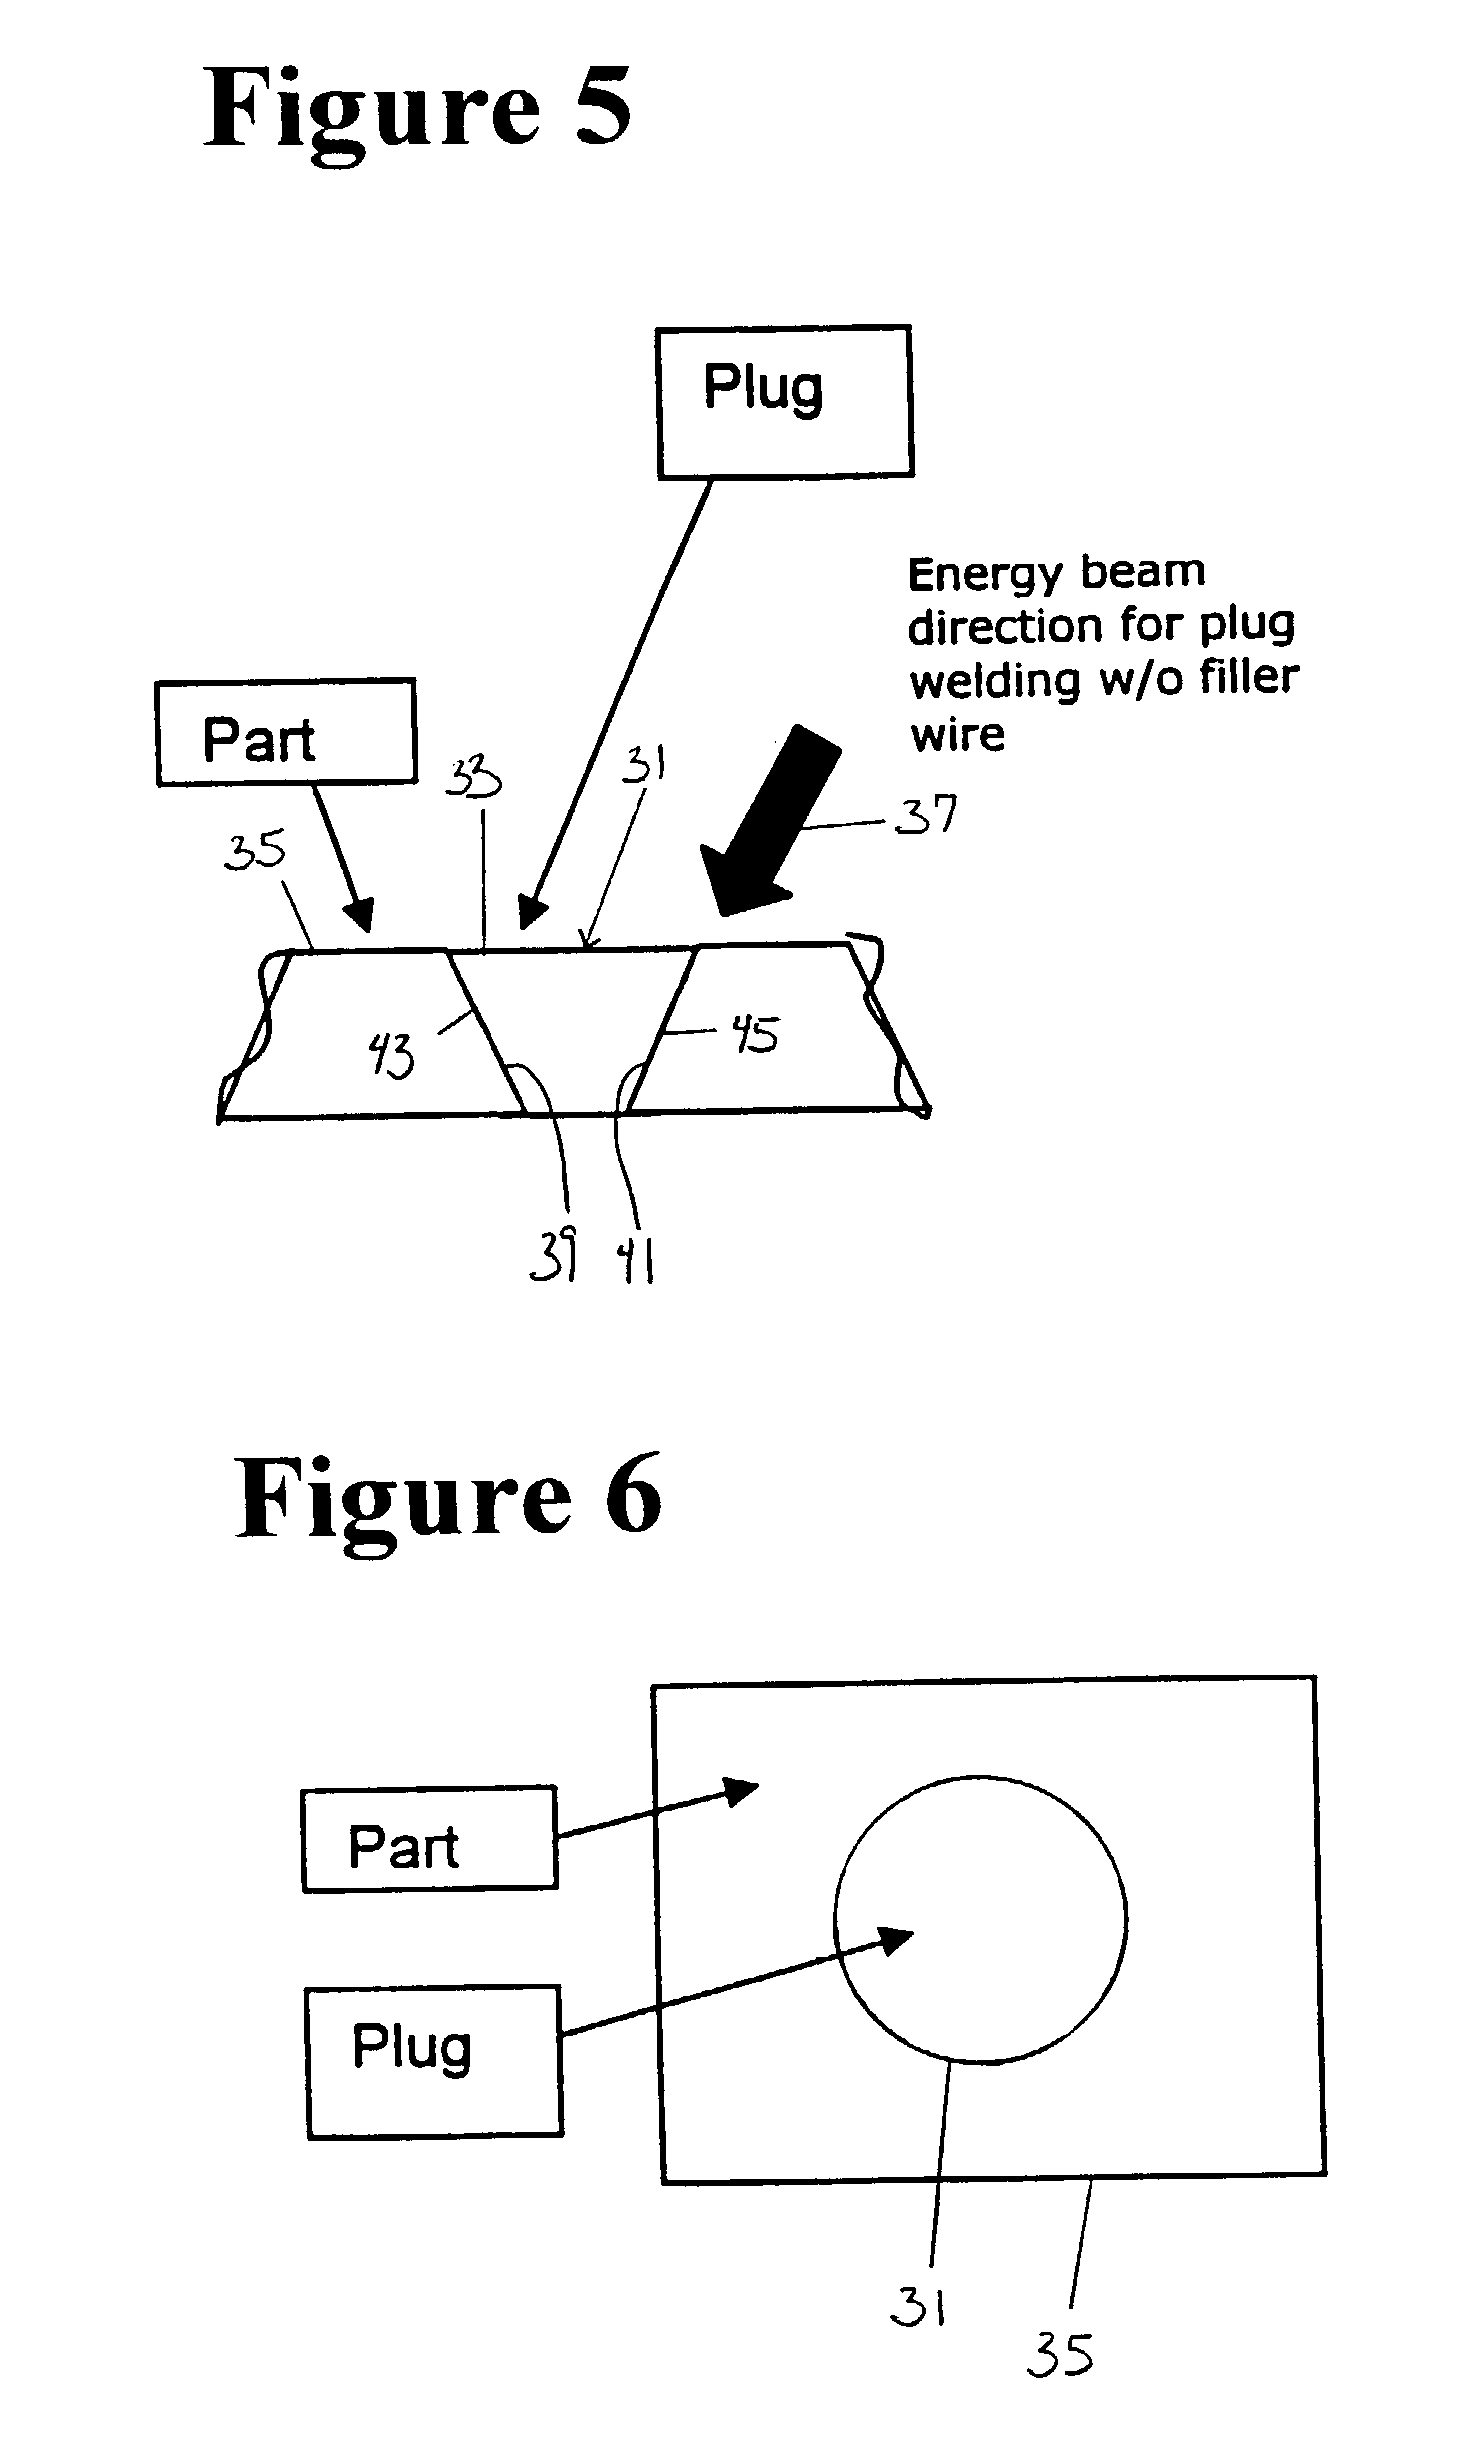 Repair with feedstock having conforming surfaces with a substrate